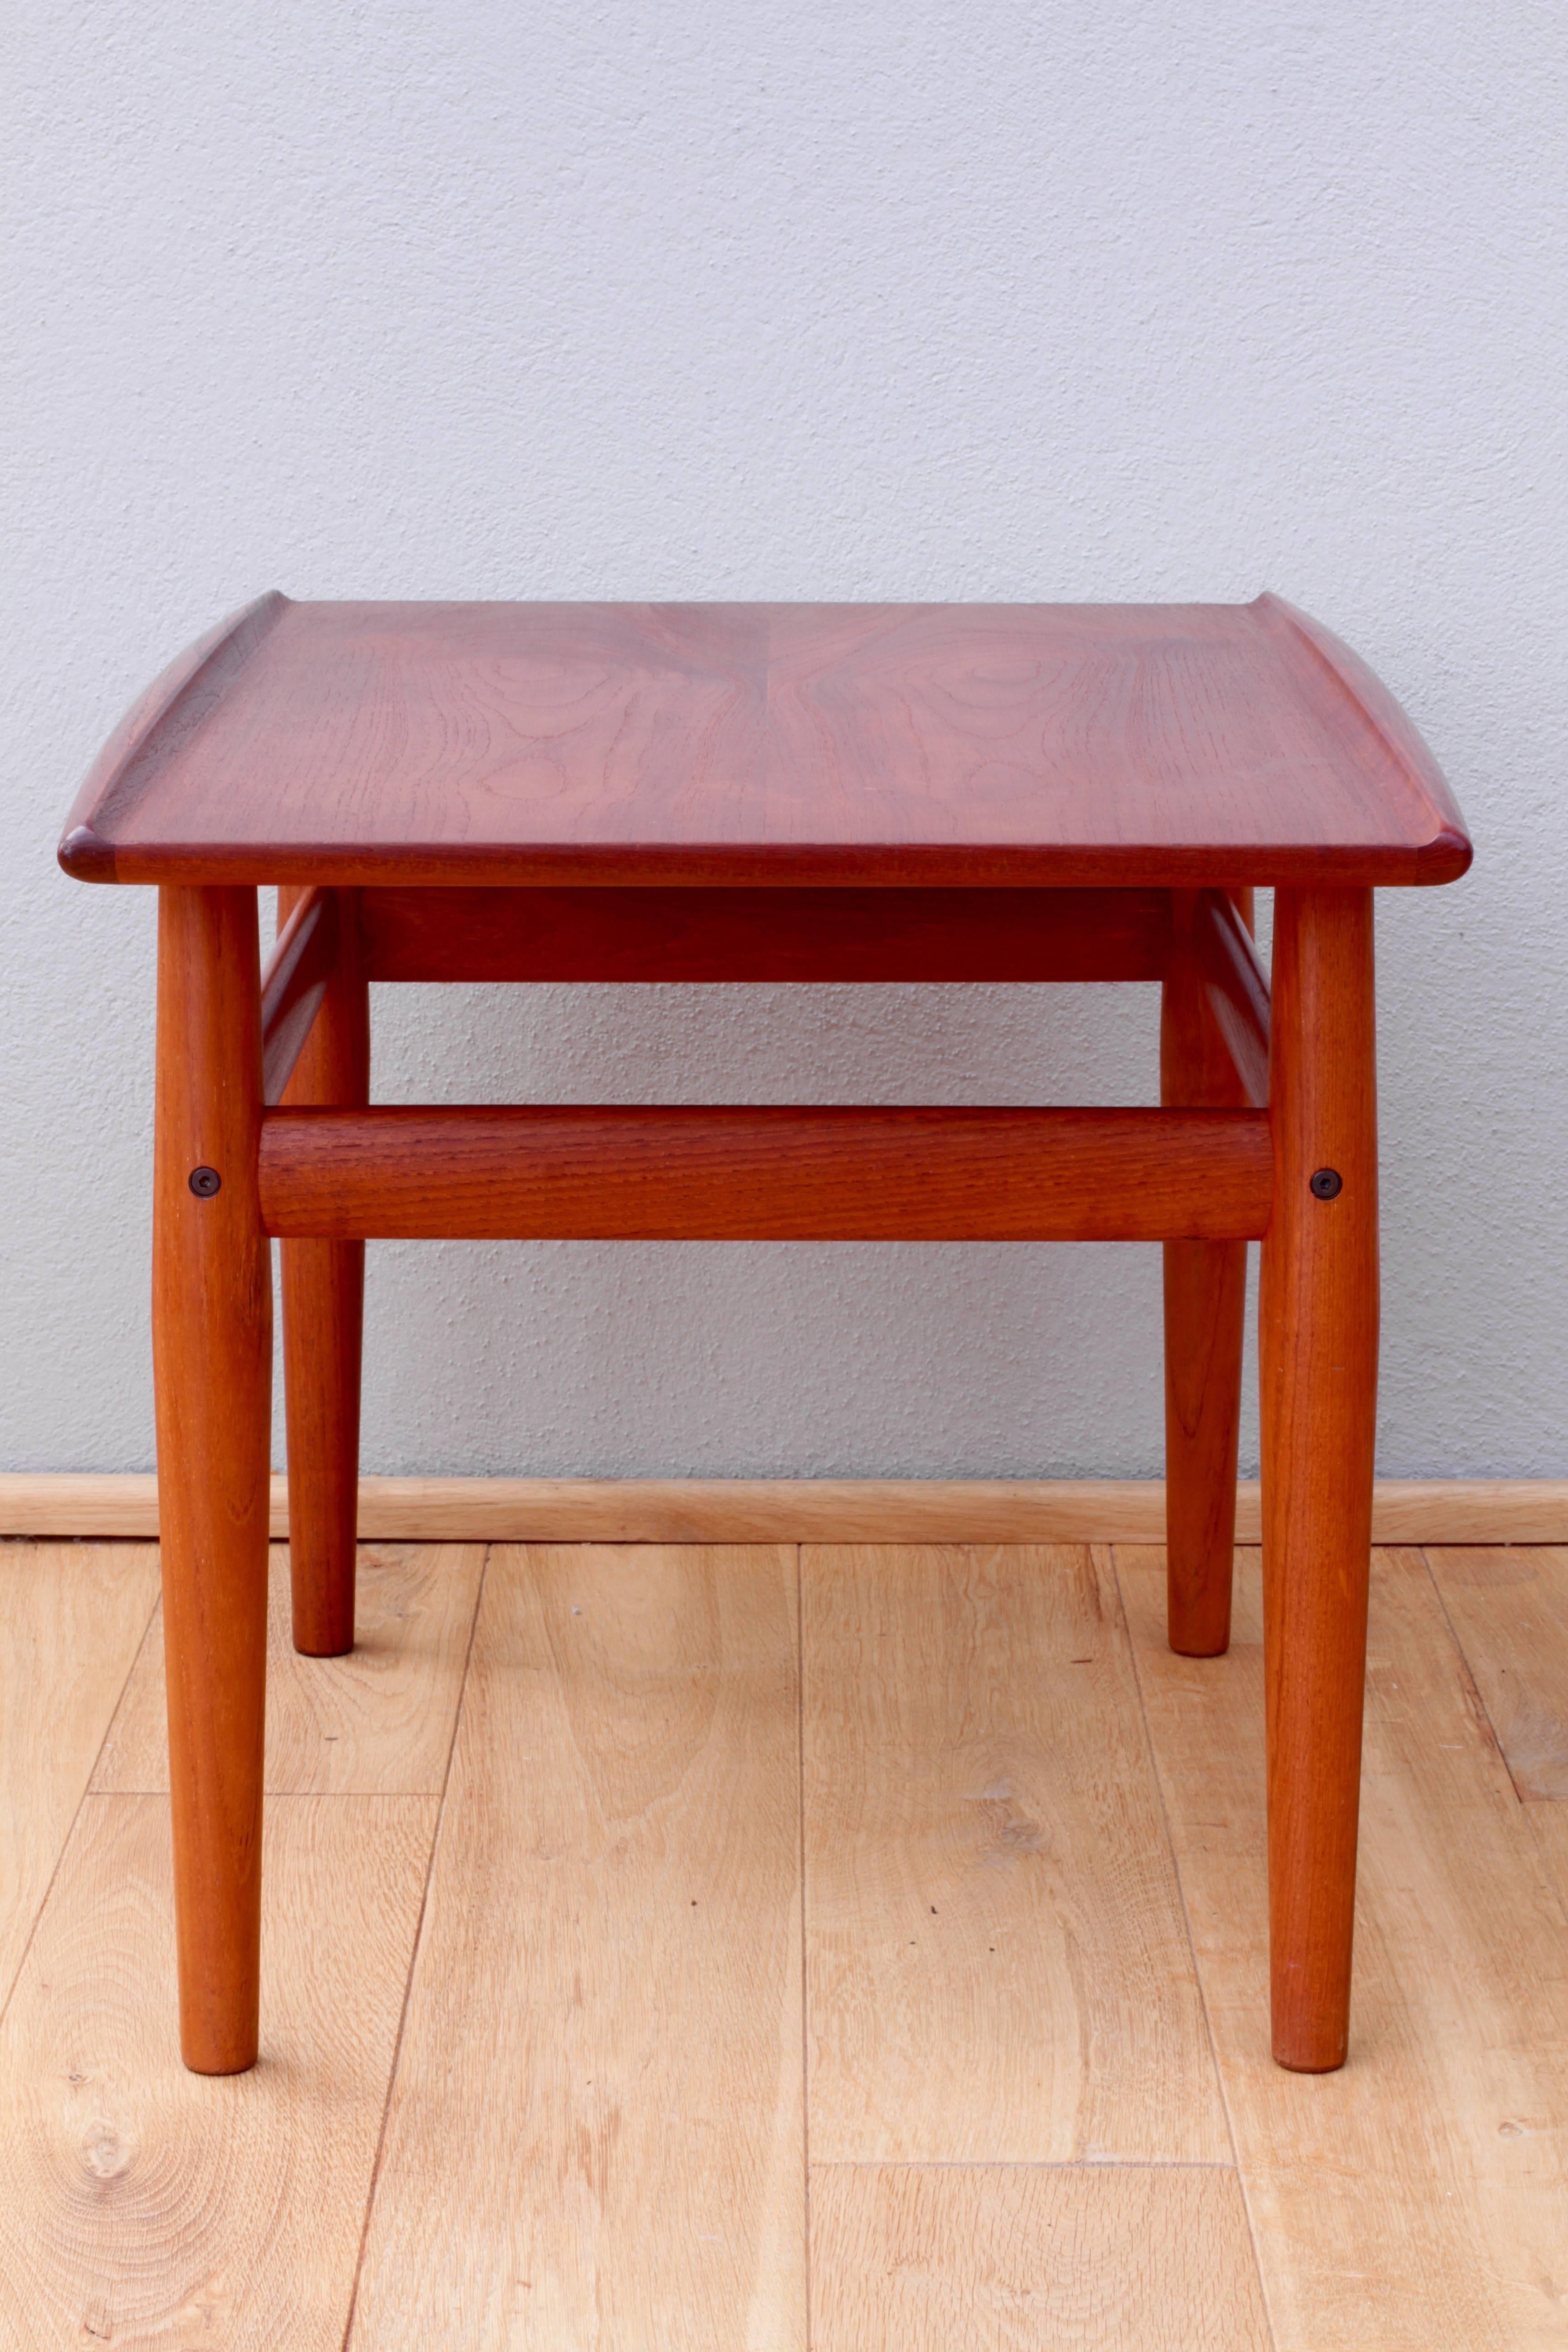 A wonderful vintage Mid-Century side or end table by Grete Jalk for Glostrup Møbelfabrik, made in Denmark, circa 1964. This beautifully constructed solid teak table features elegantly tapered legs, brass details and a hand shaped, lipped tabletop